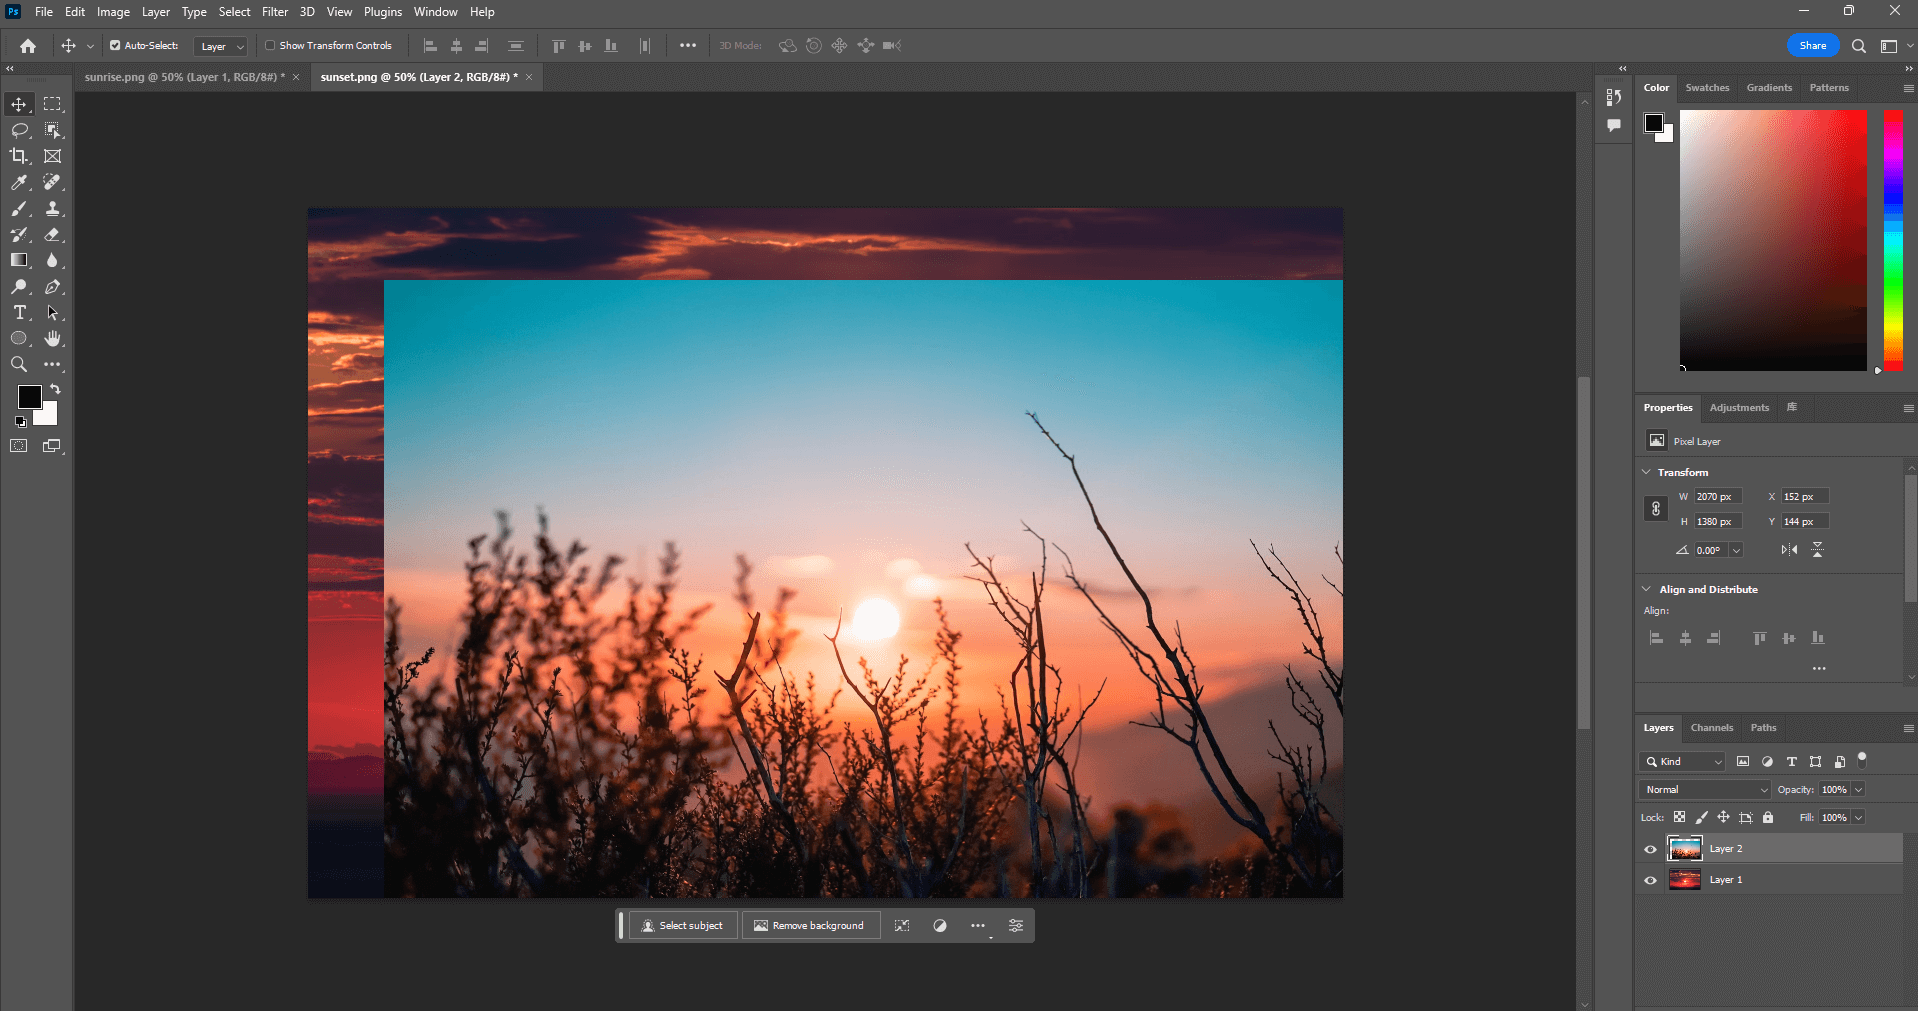 add an image in photoshop by copying and pasting